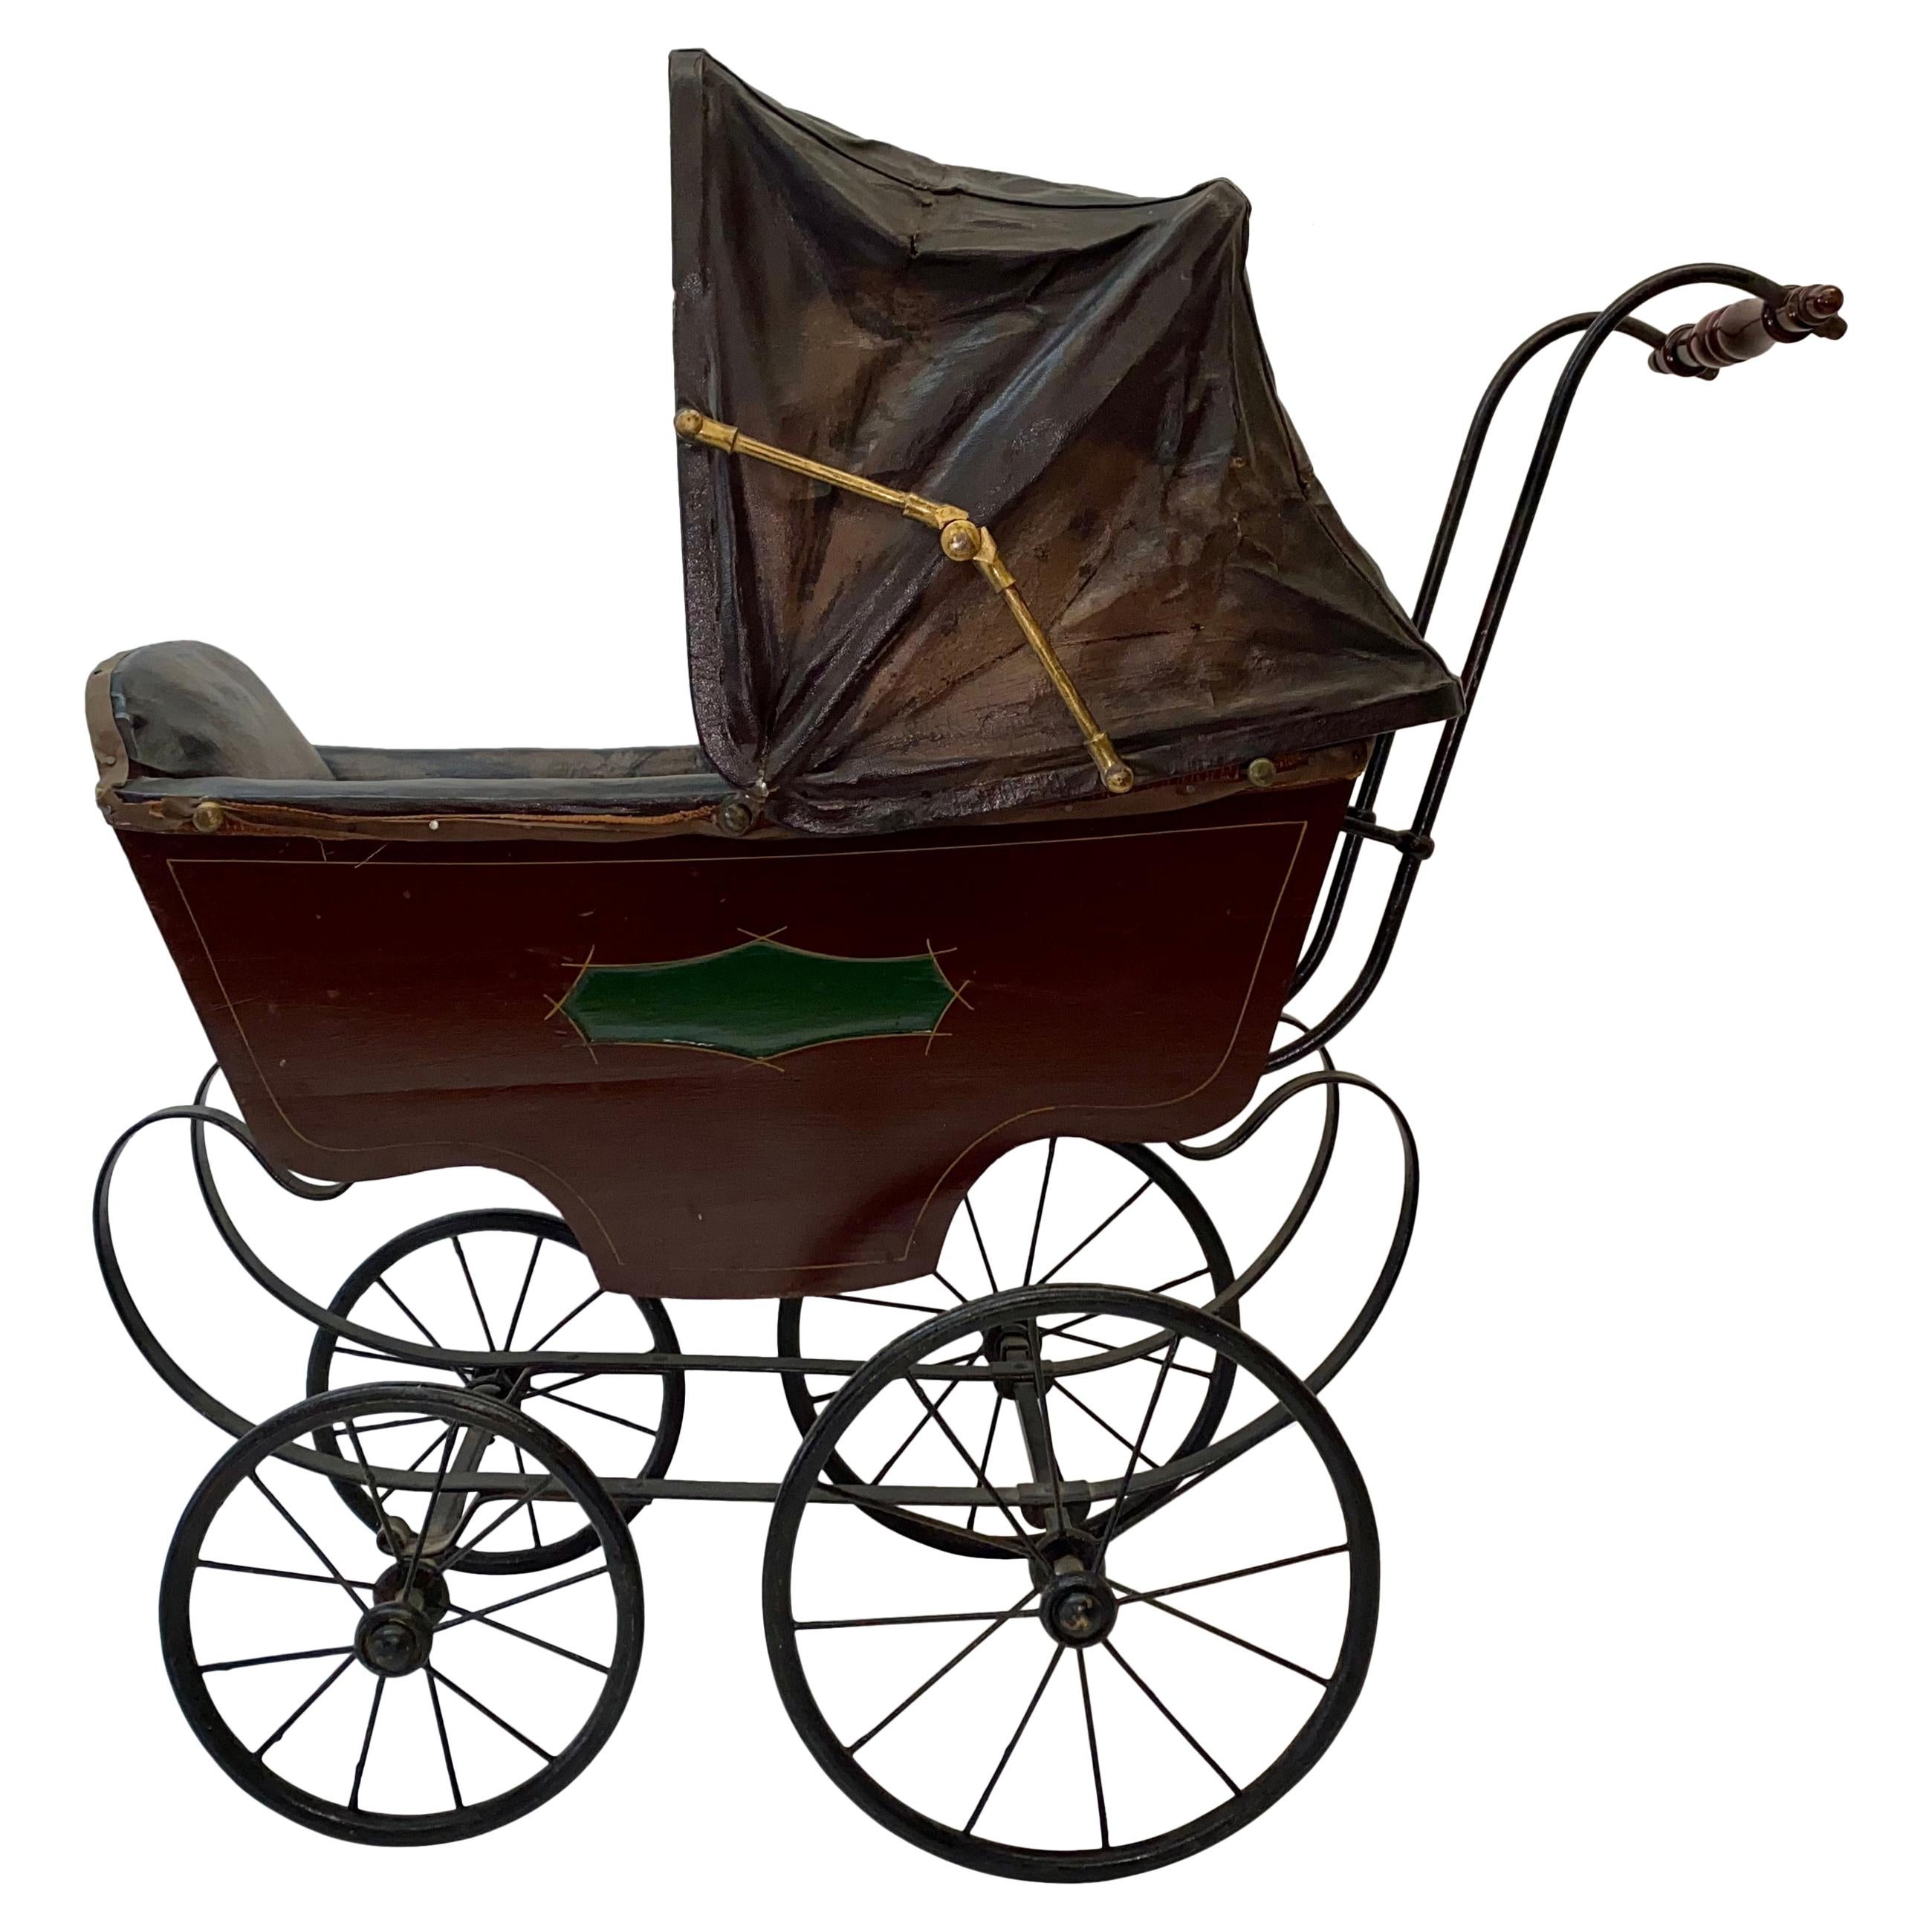 Mid 19th Century Baby Carriage / Stroller by F. A. Whitney, Leominster, MA